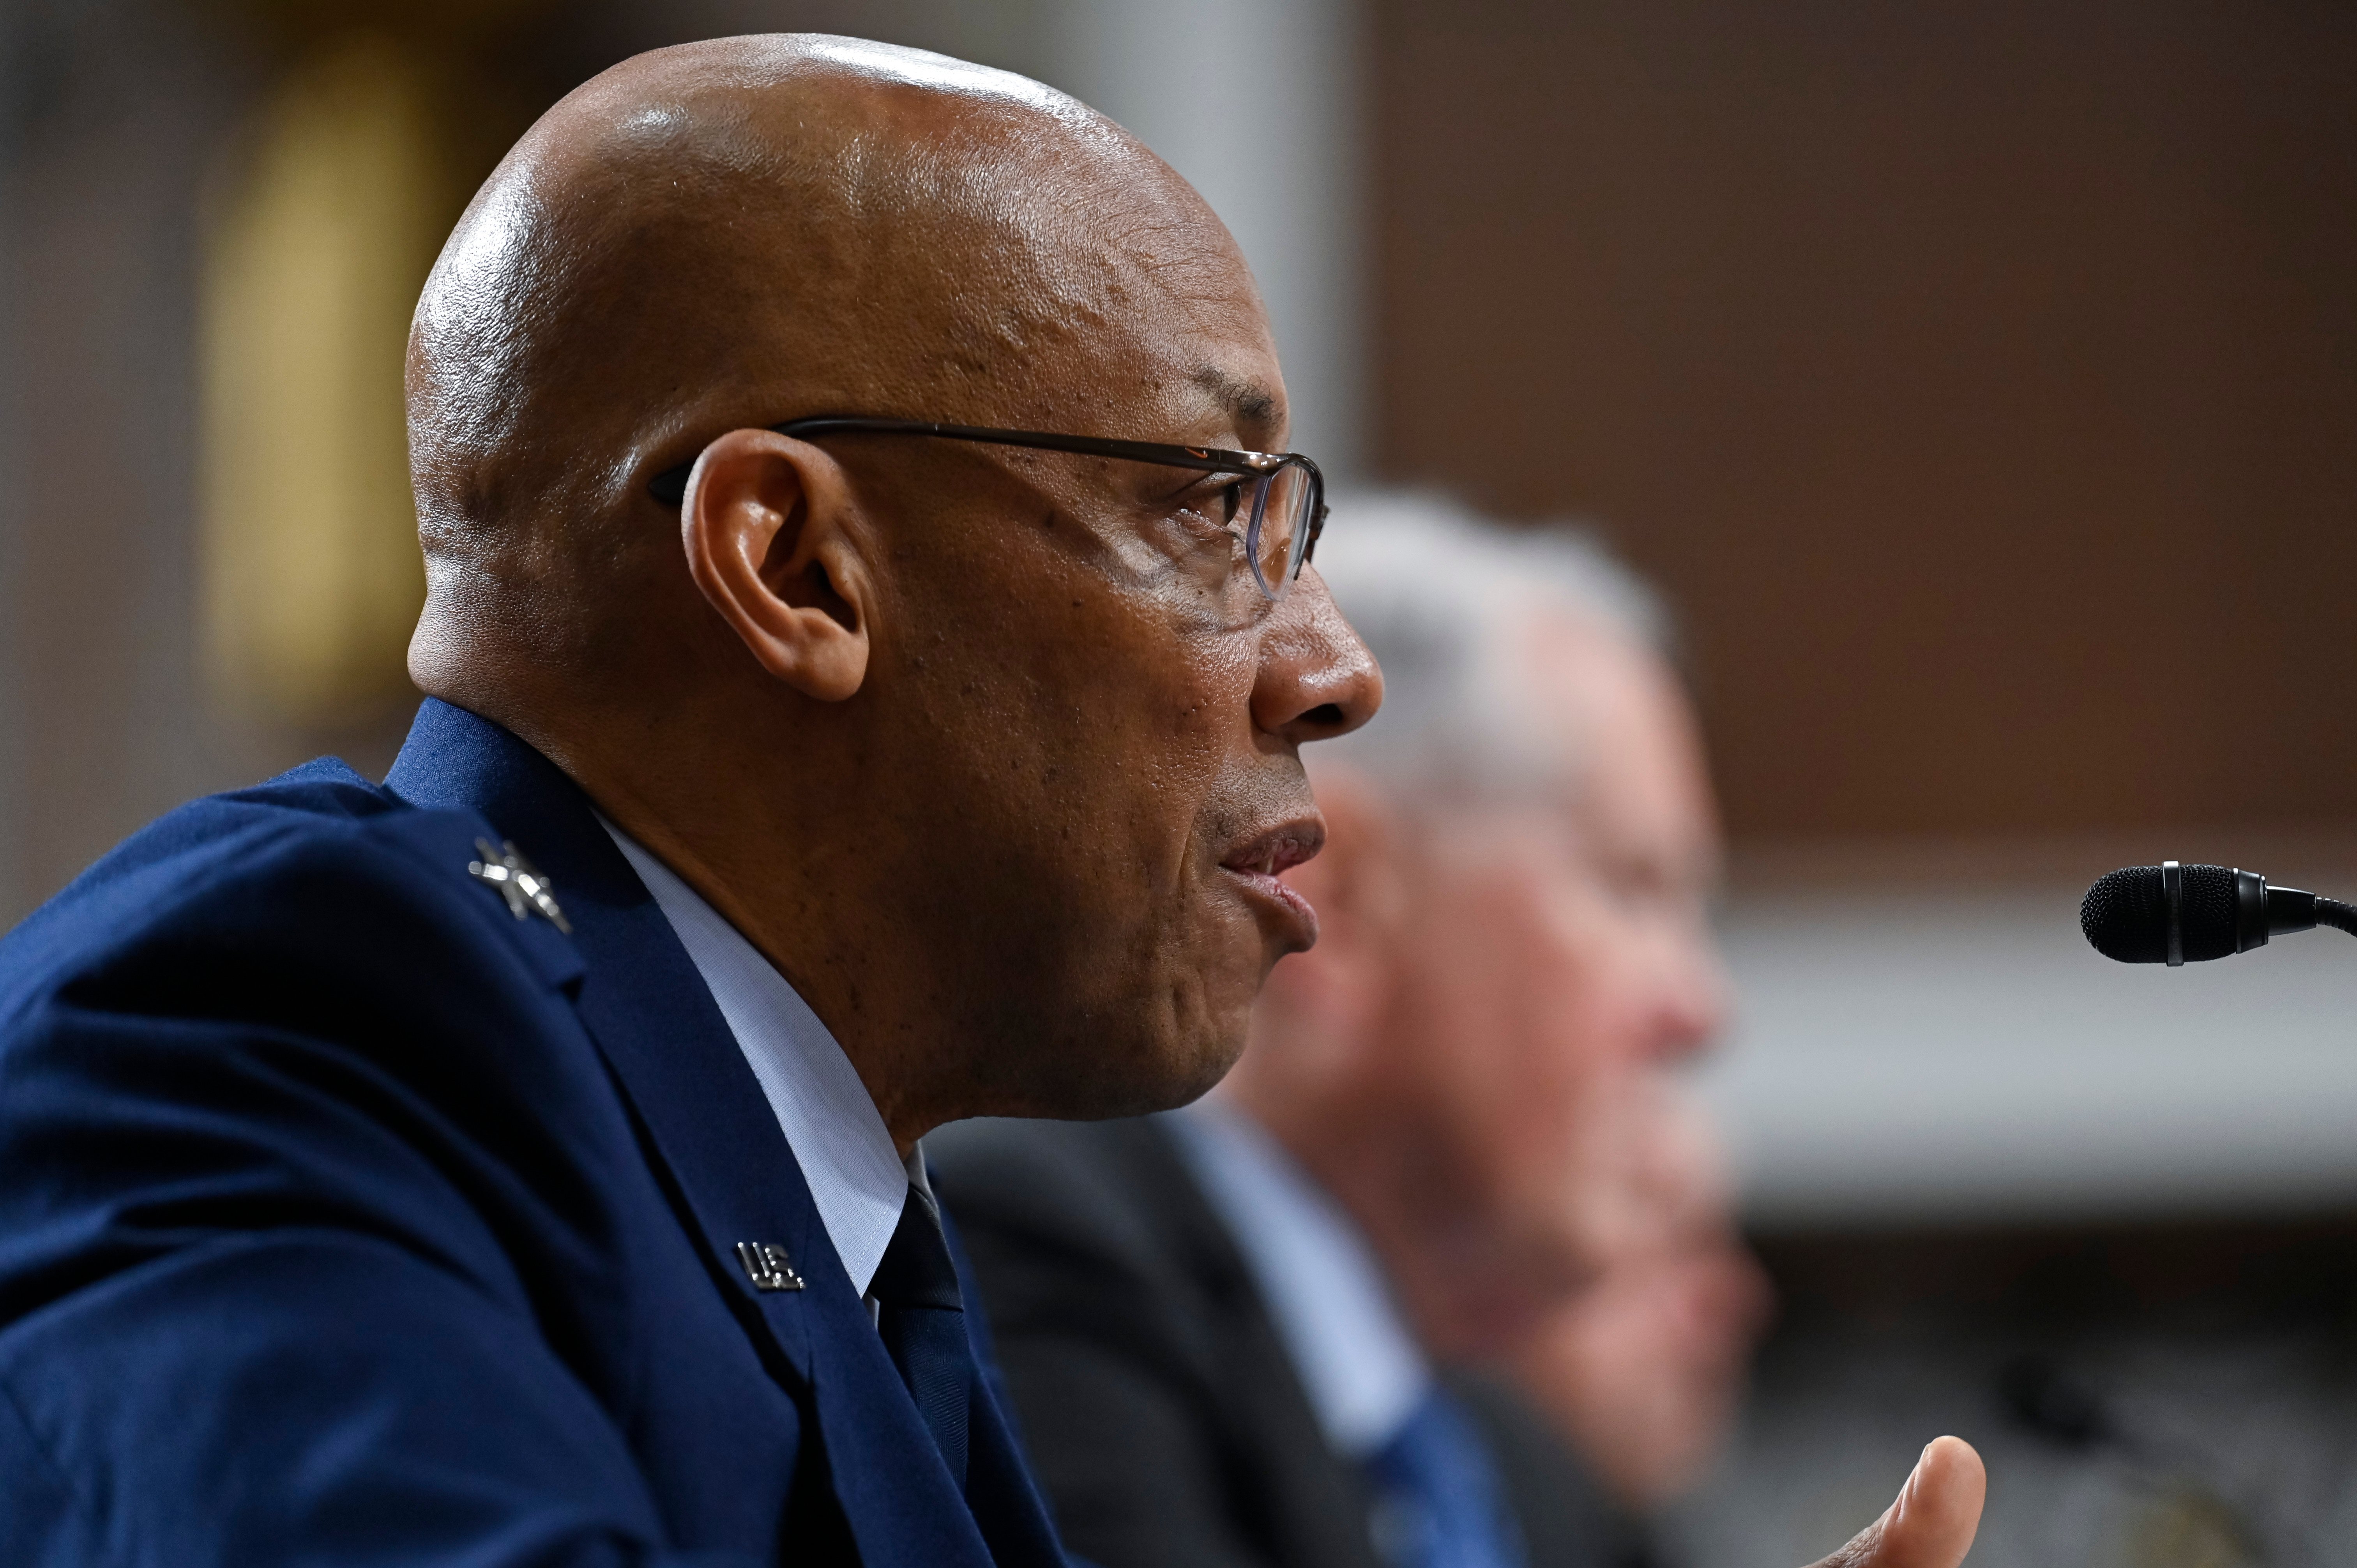 Air Force leaders set new goals to diversify officer corps